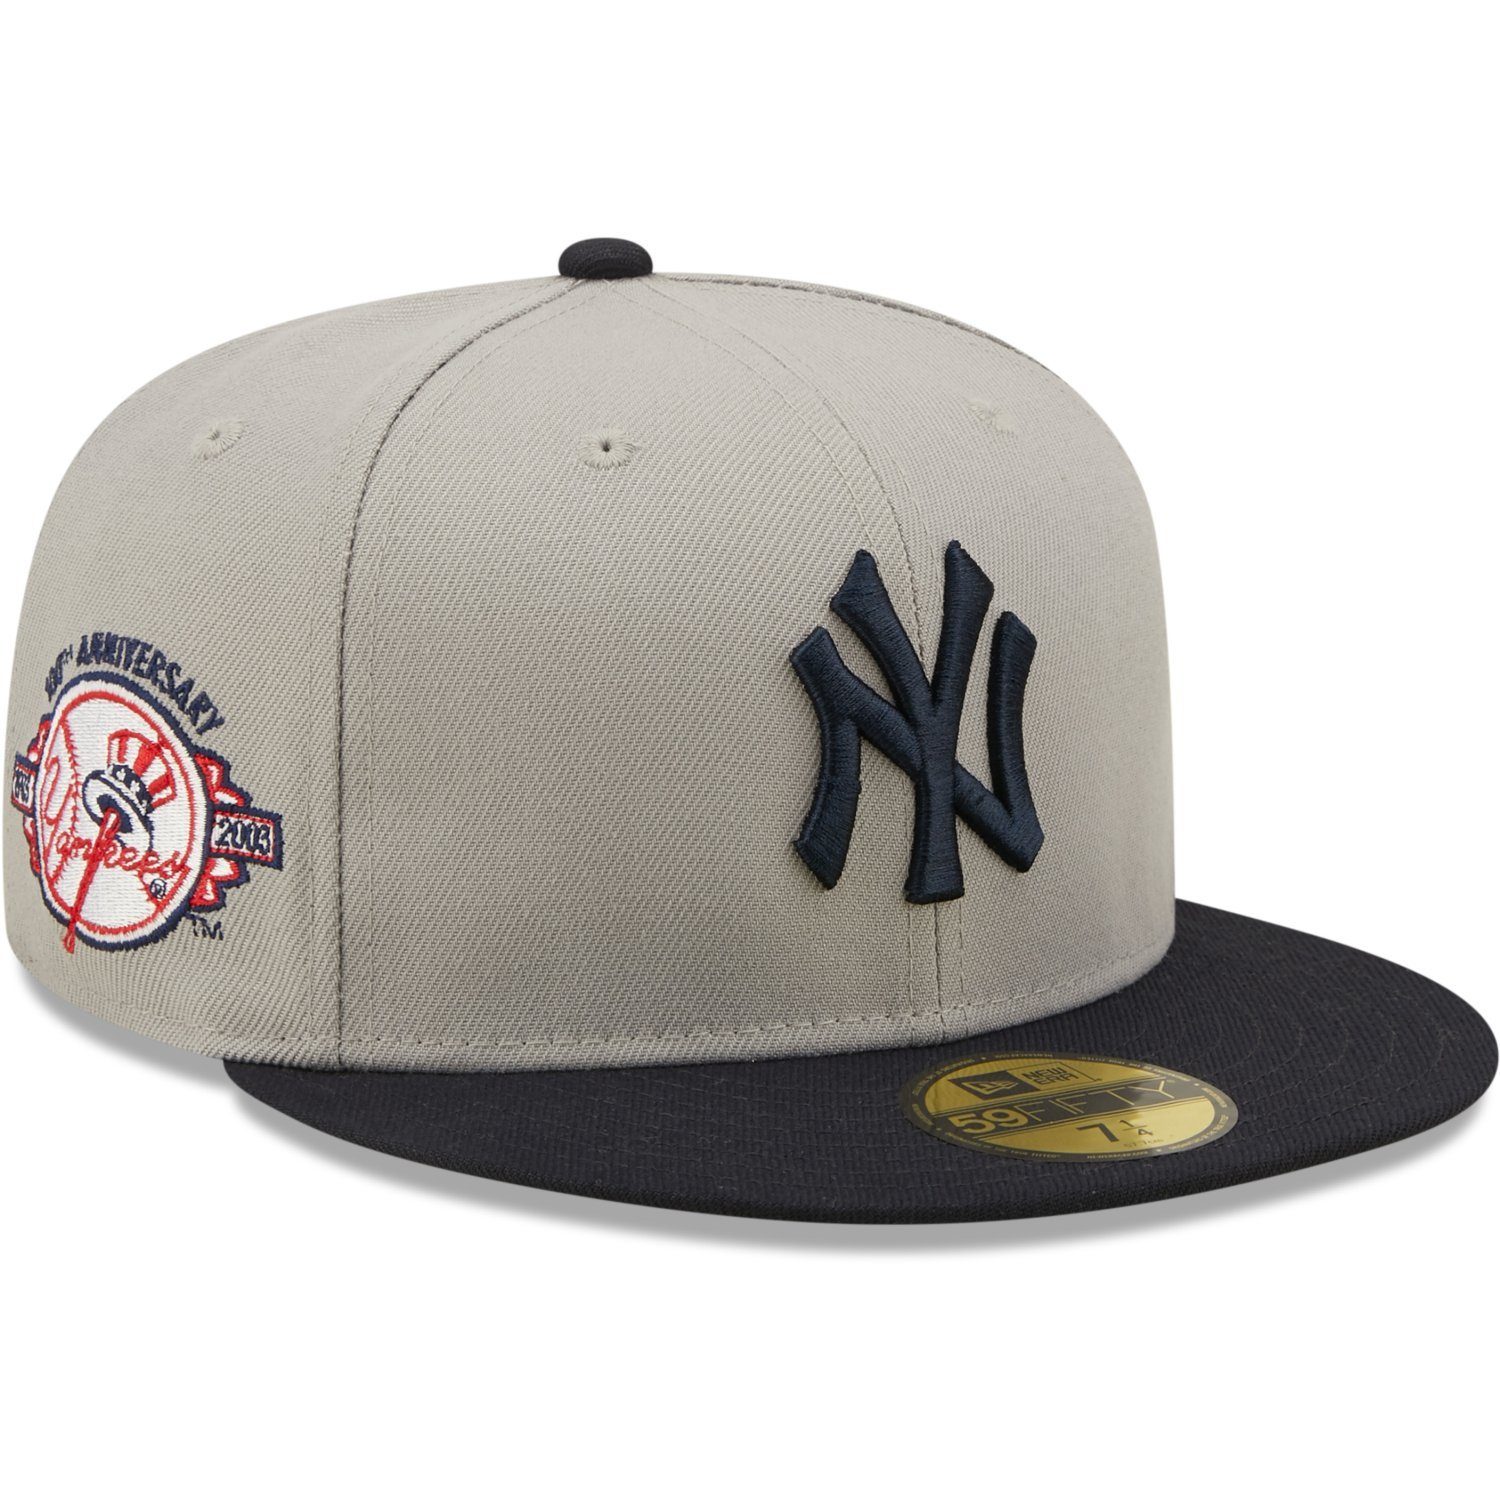 Fitted New 59Fifty SIDE Era New PATCH York Cap Yankees